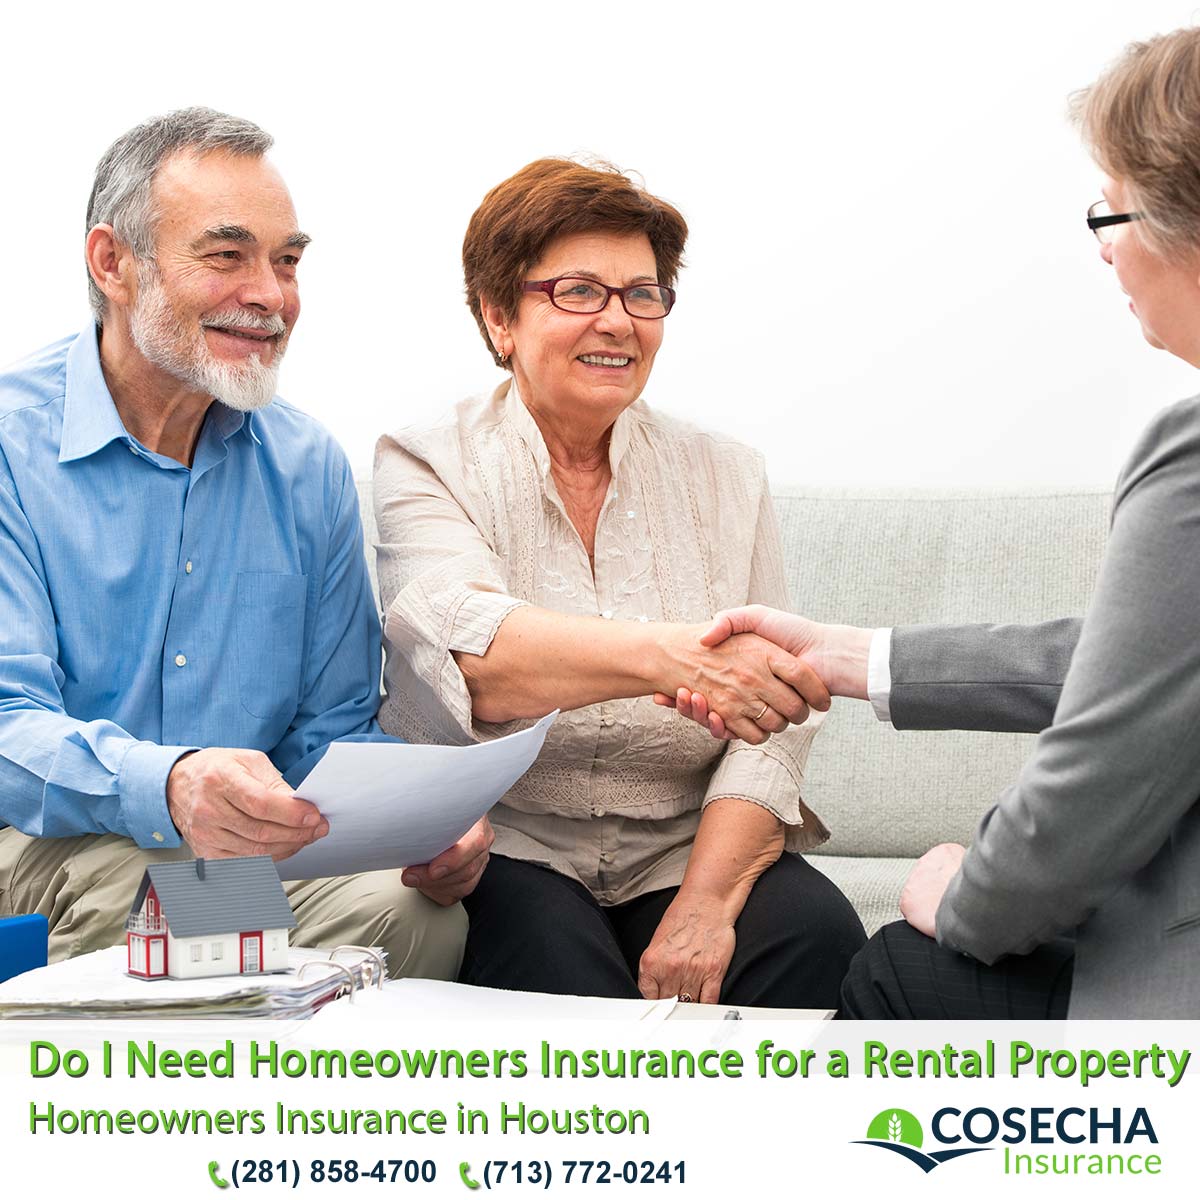 31 Do I Need Homeowners Insurance for a Rental Property